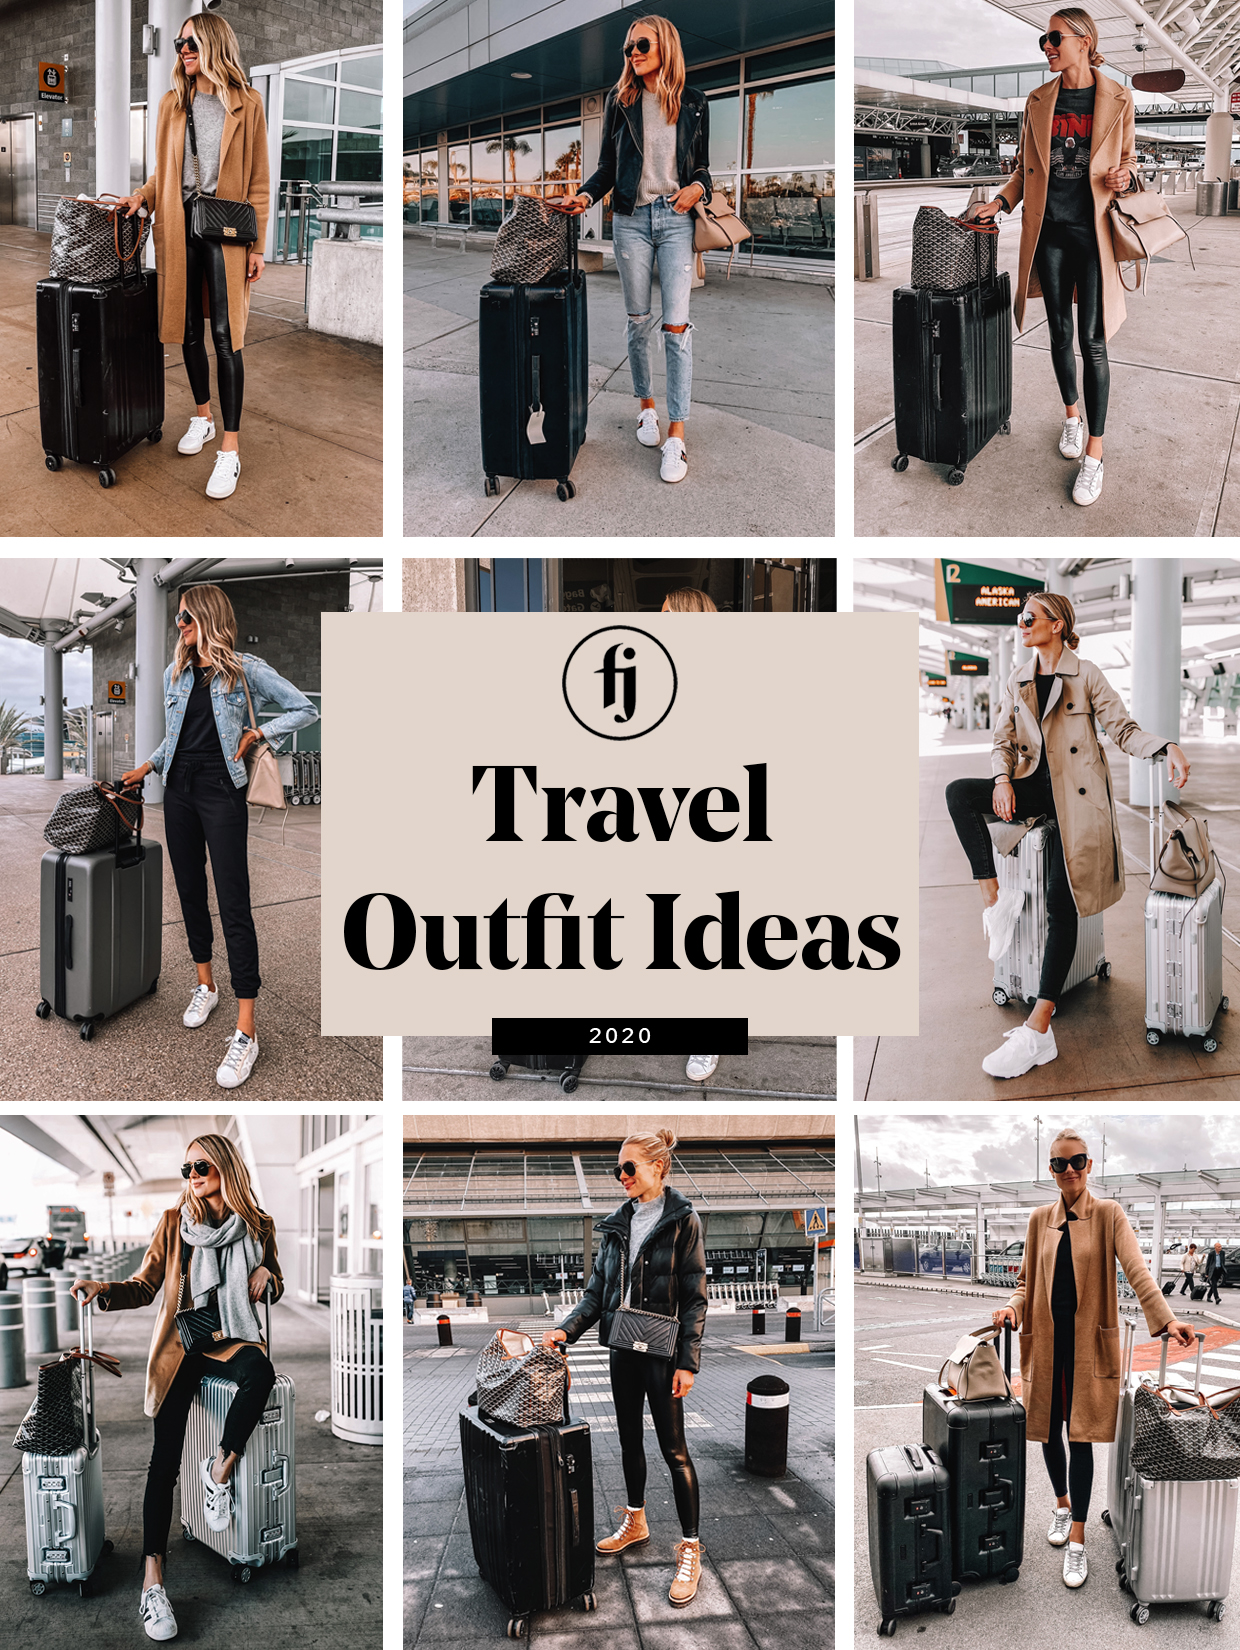 travel style examples